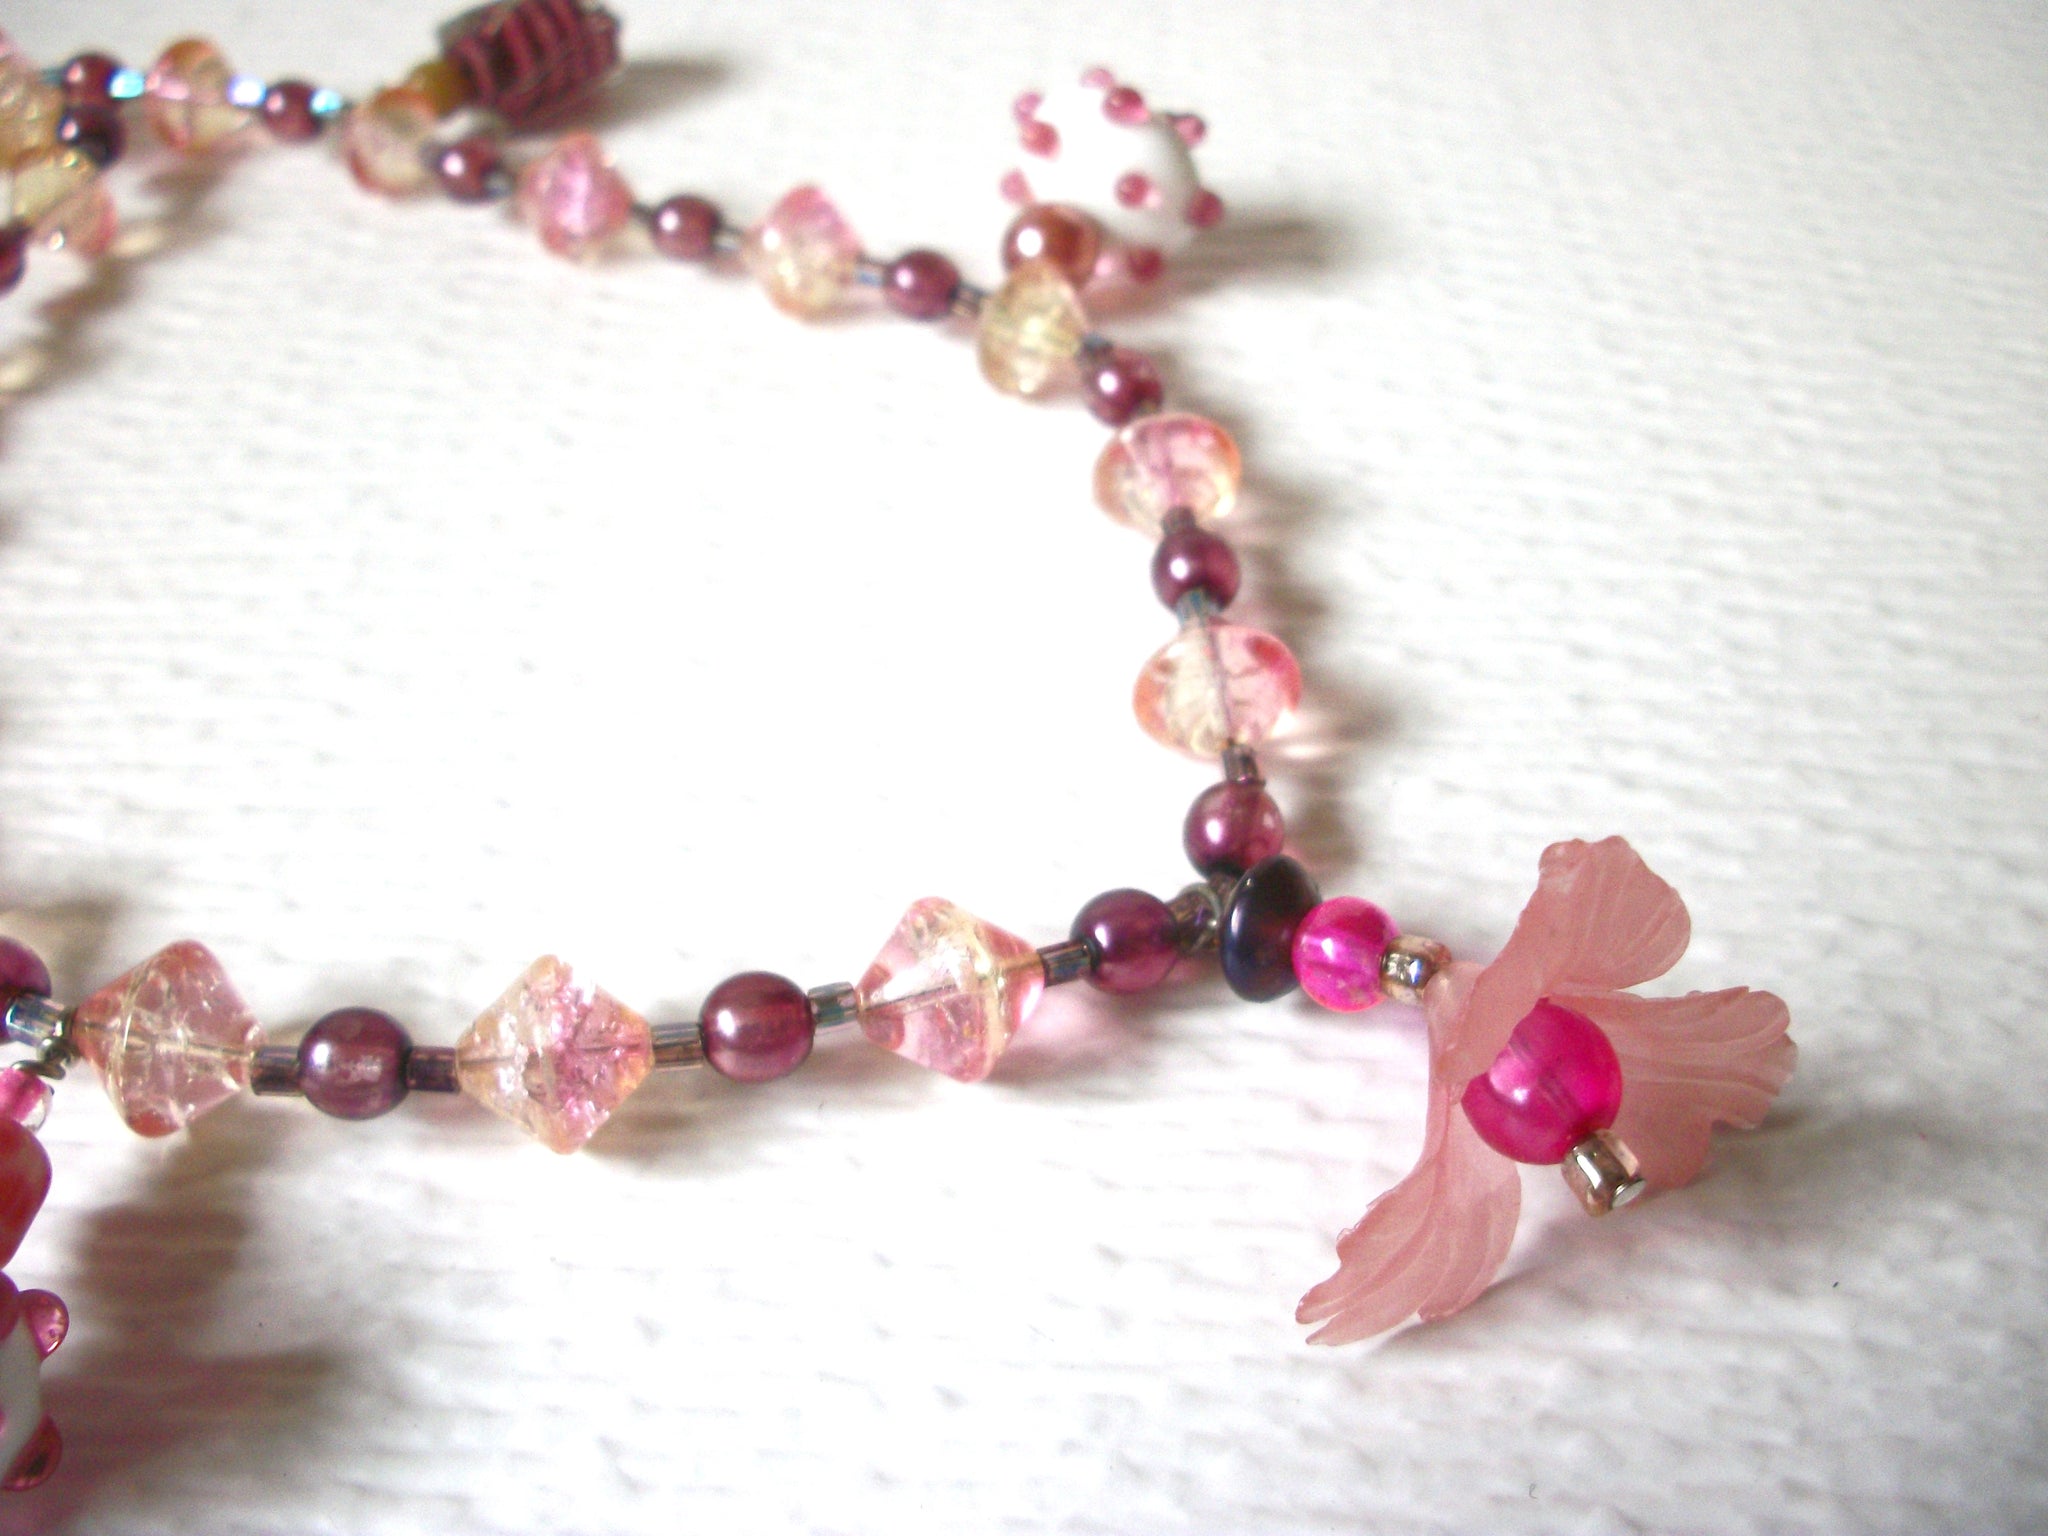 Hand Made Pink White Czech Glass Murano Lamp Work Necklace 122420